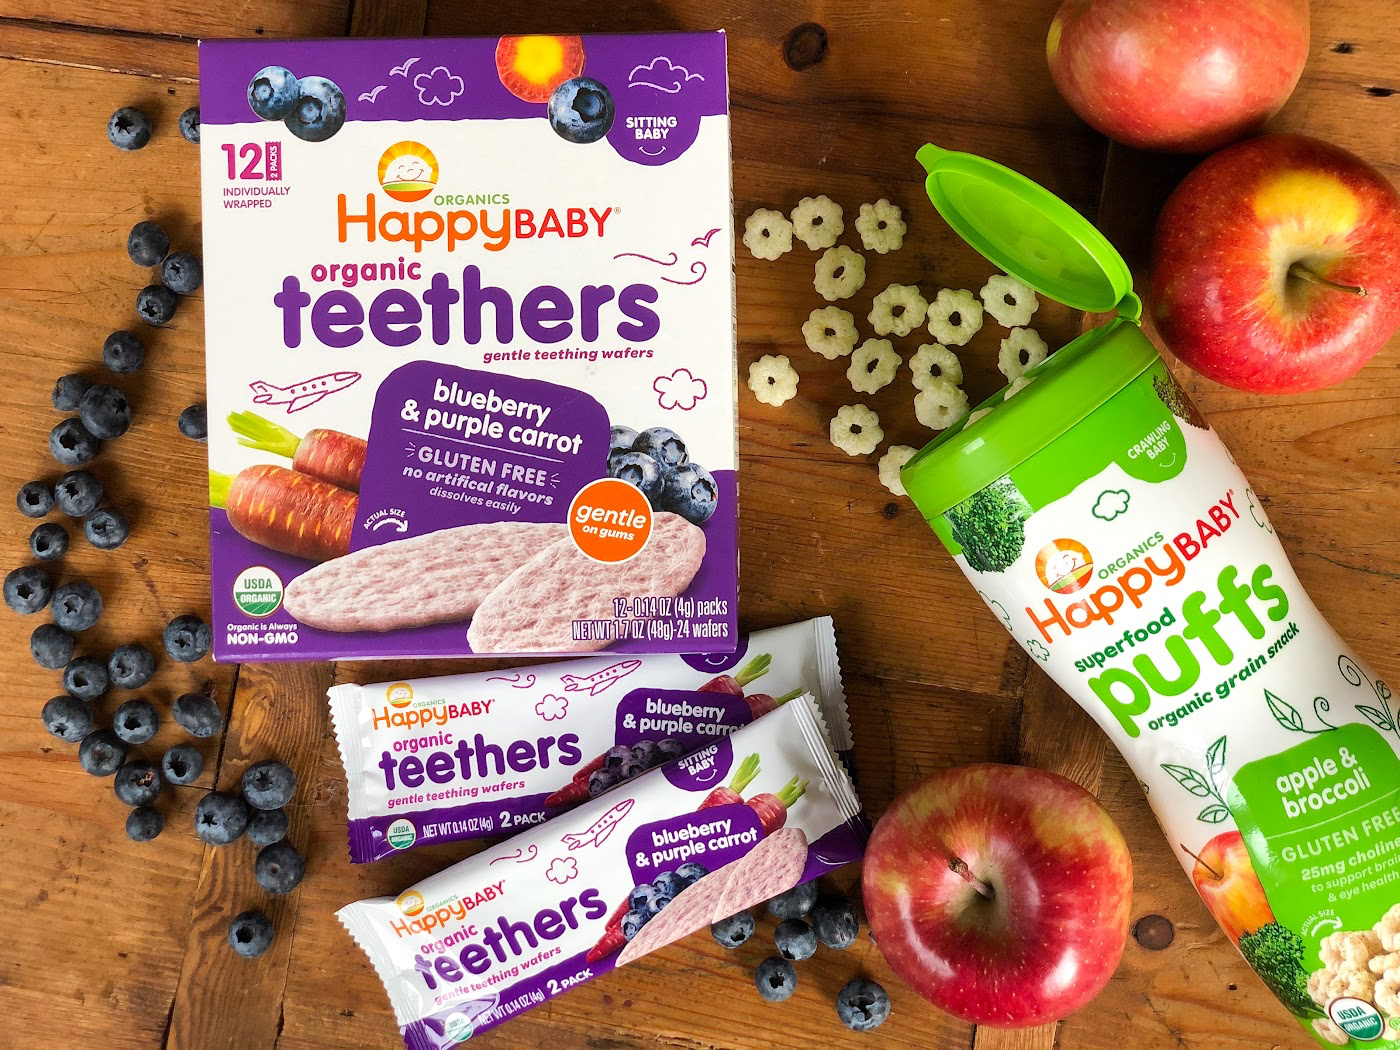 Happy Baby Organic Teethers Are Just $2.99 At Kroger (Regular Price $5.49)